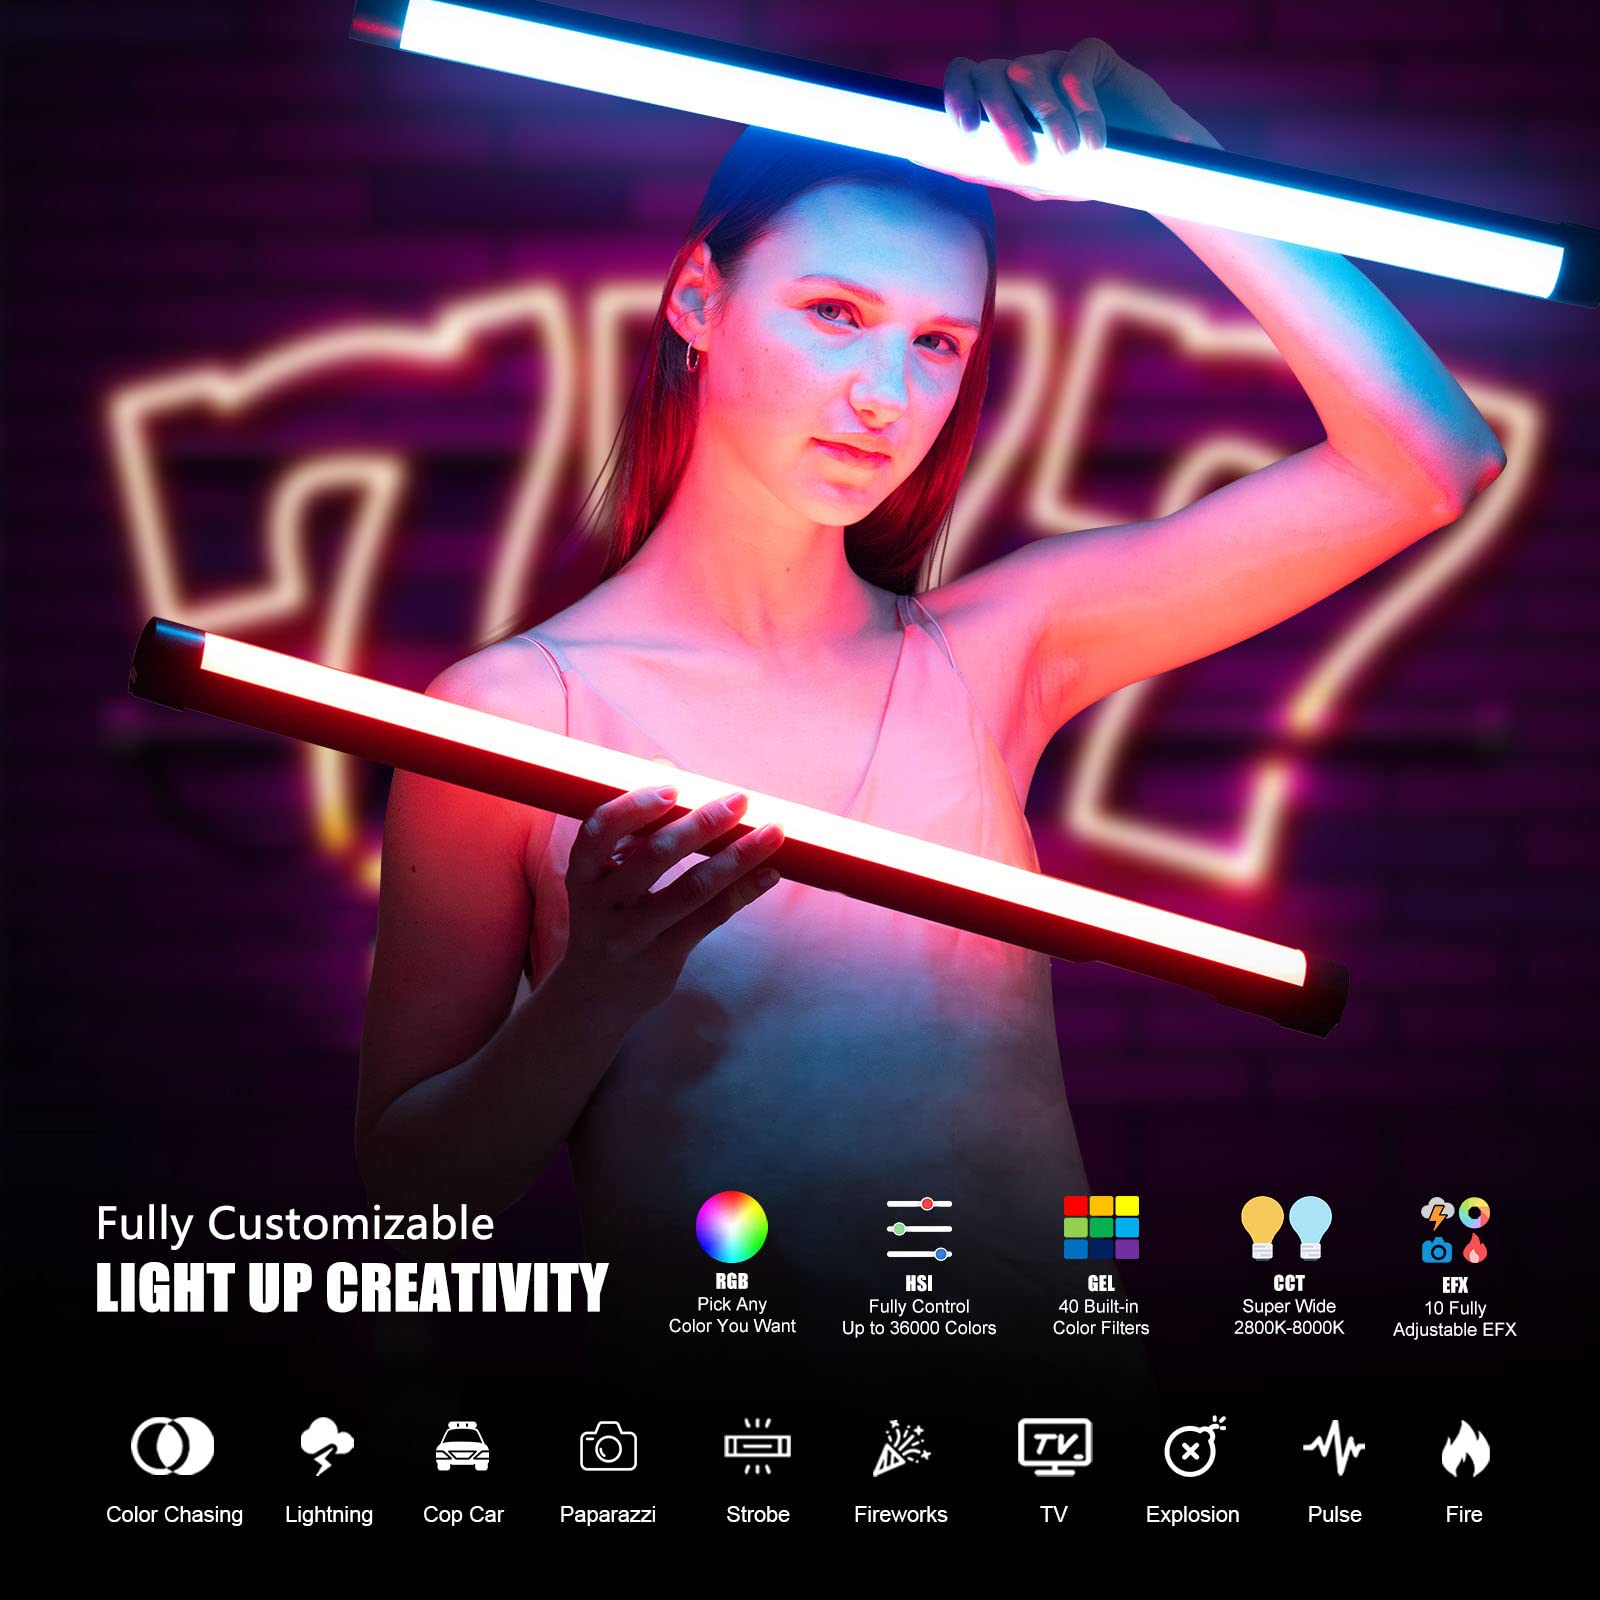 Mettlelite TLX4 RGB Tube Light LED Full Color Video Light with APP DMX Control 4 ft 2800K-8000K CRI96 TLCI97 360° RGB CCT HSI Mode 10 Customizable Light Effects Built in Rechargeable Battery